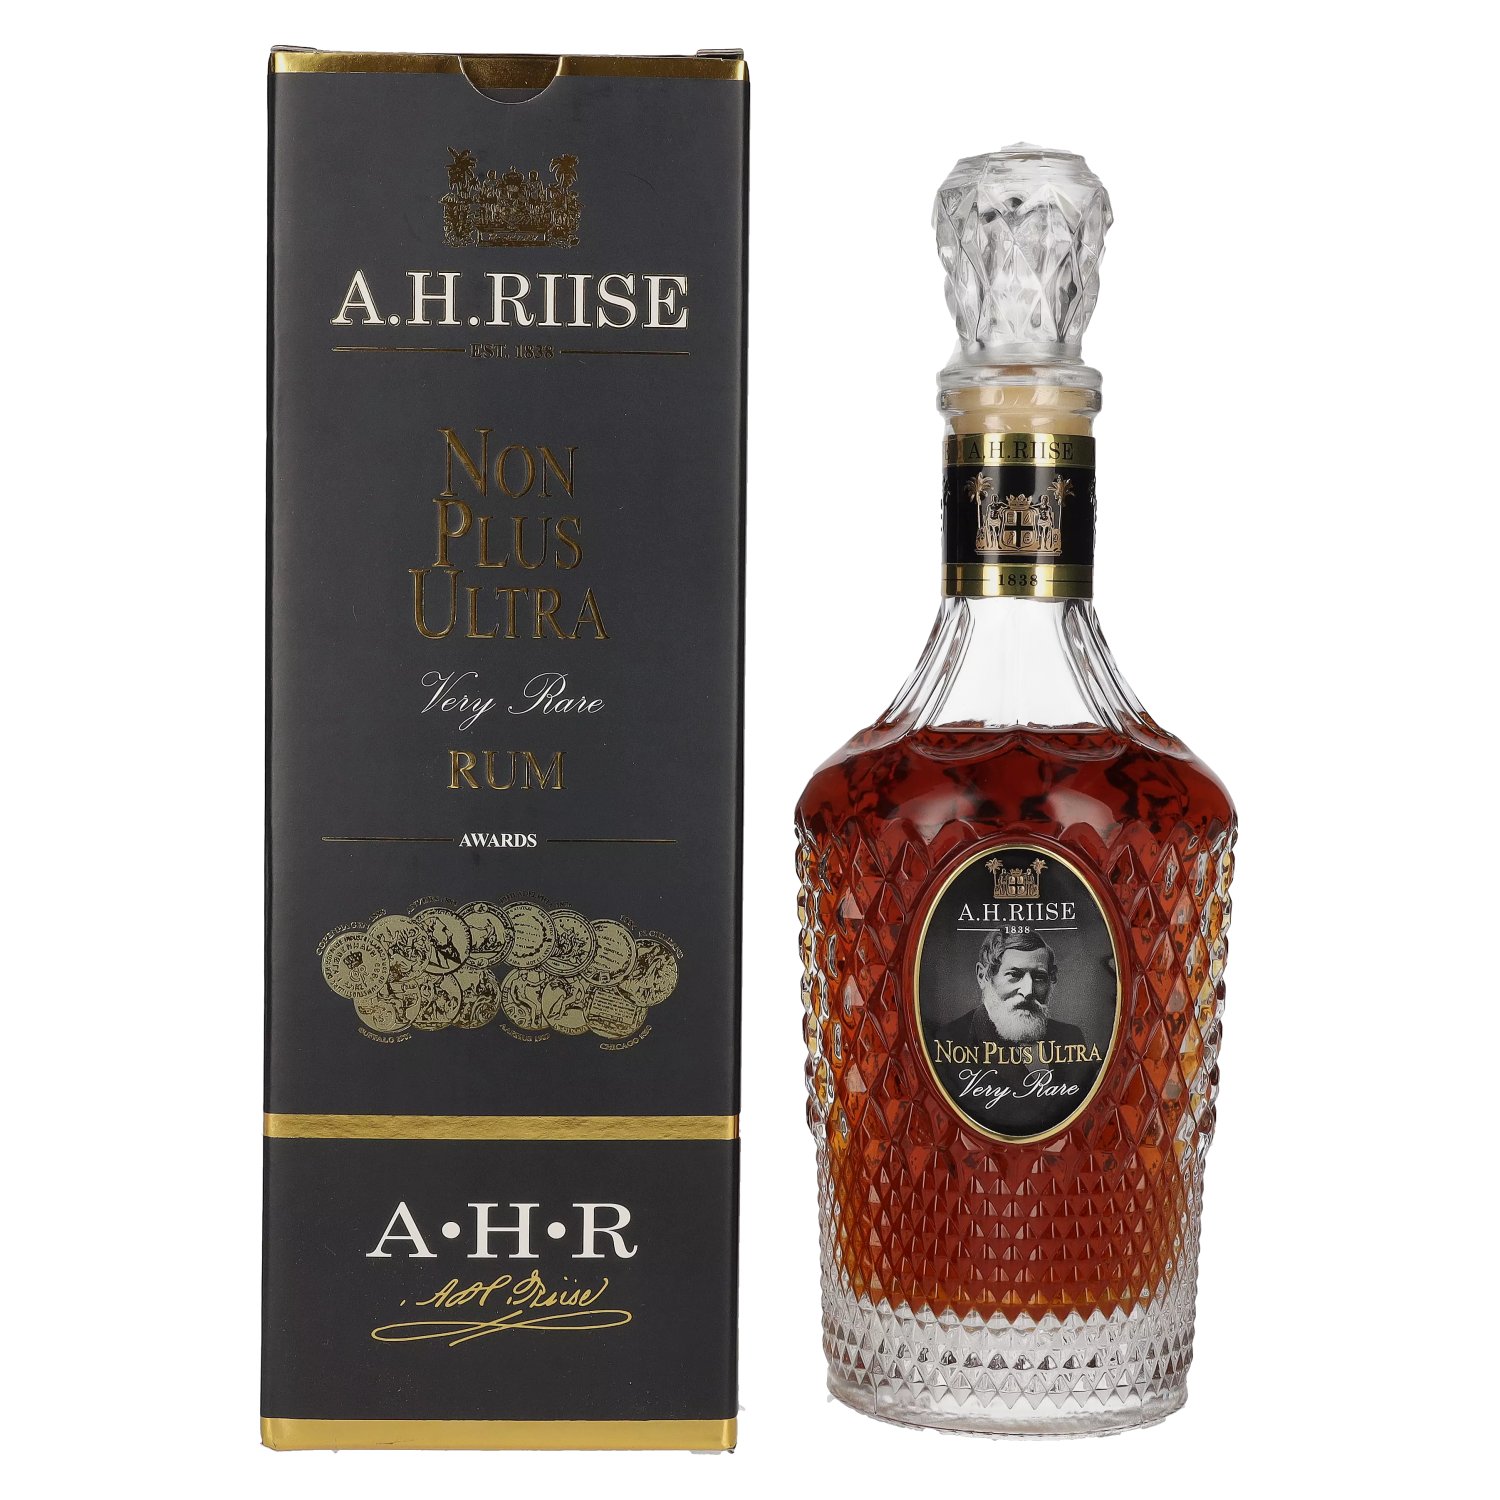 A.H. Riise Very Rum Vol. Old - 42% Edition NON in Giftbox Rare PLUS 0,7l ULTRA